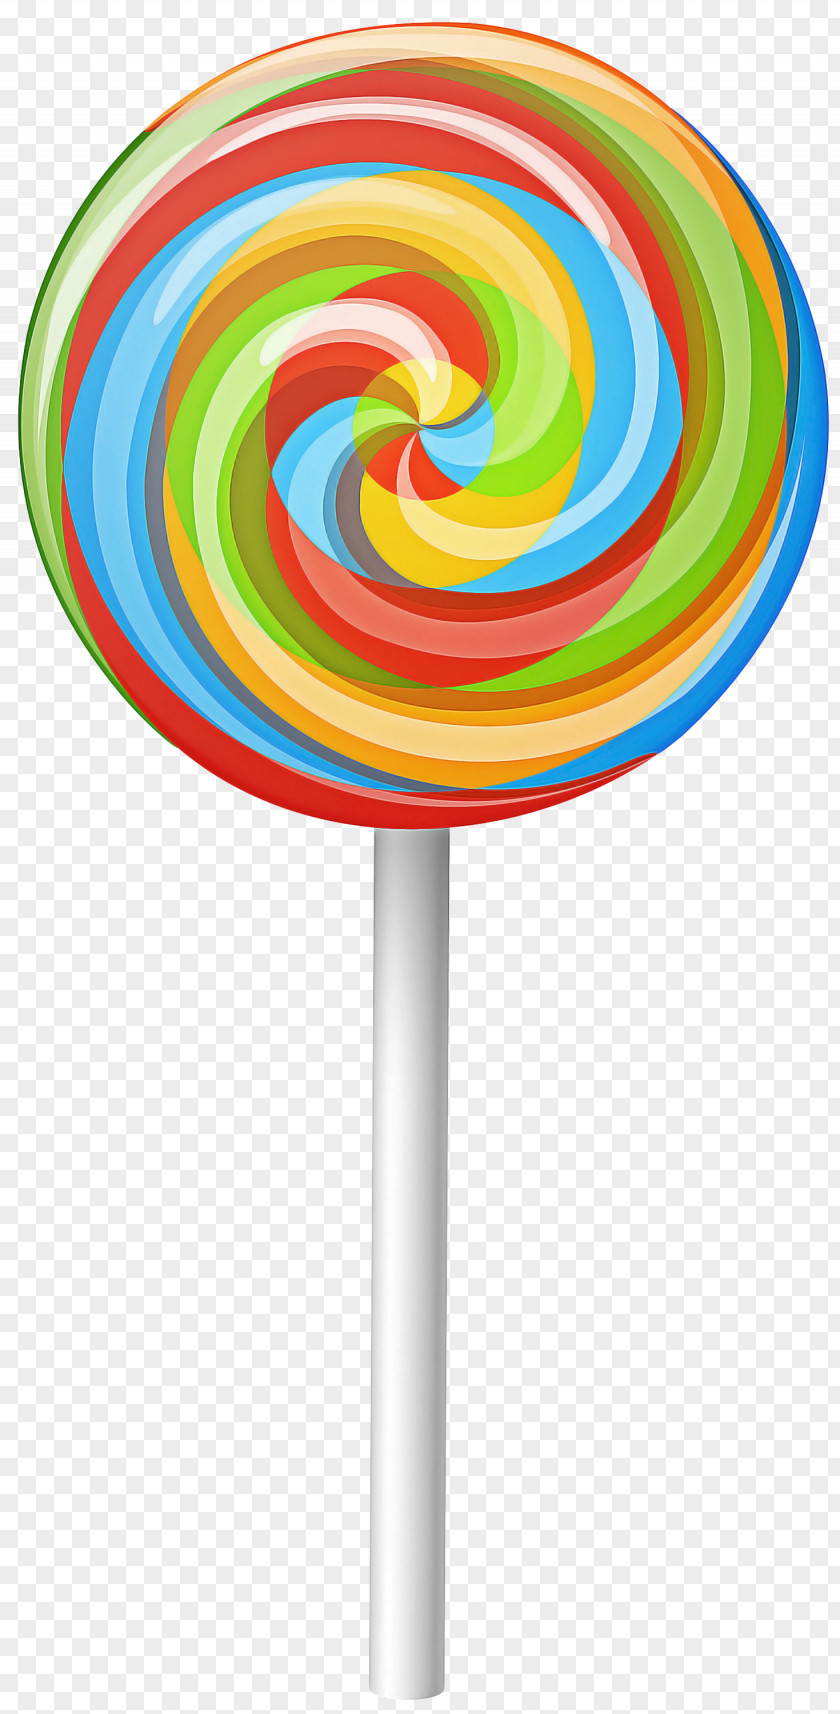 Food Candy Lollipop Stick Confectionery PNG